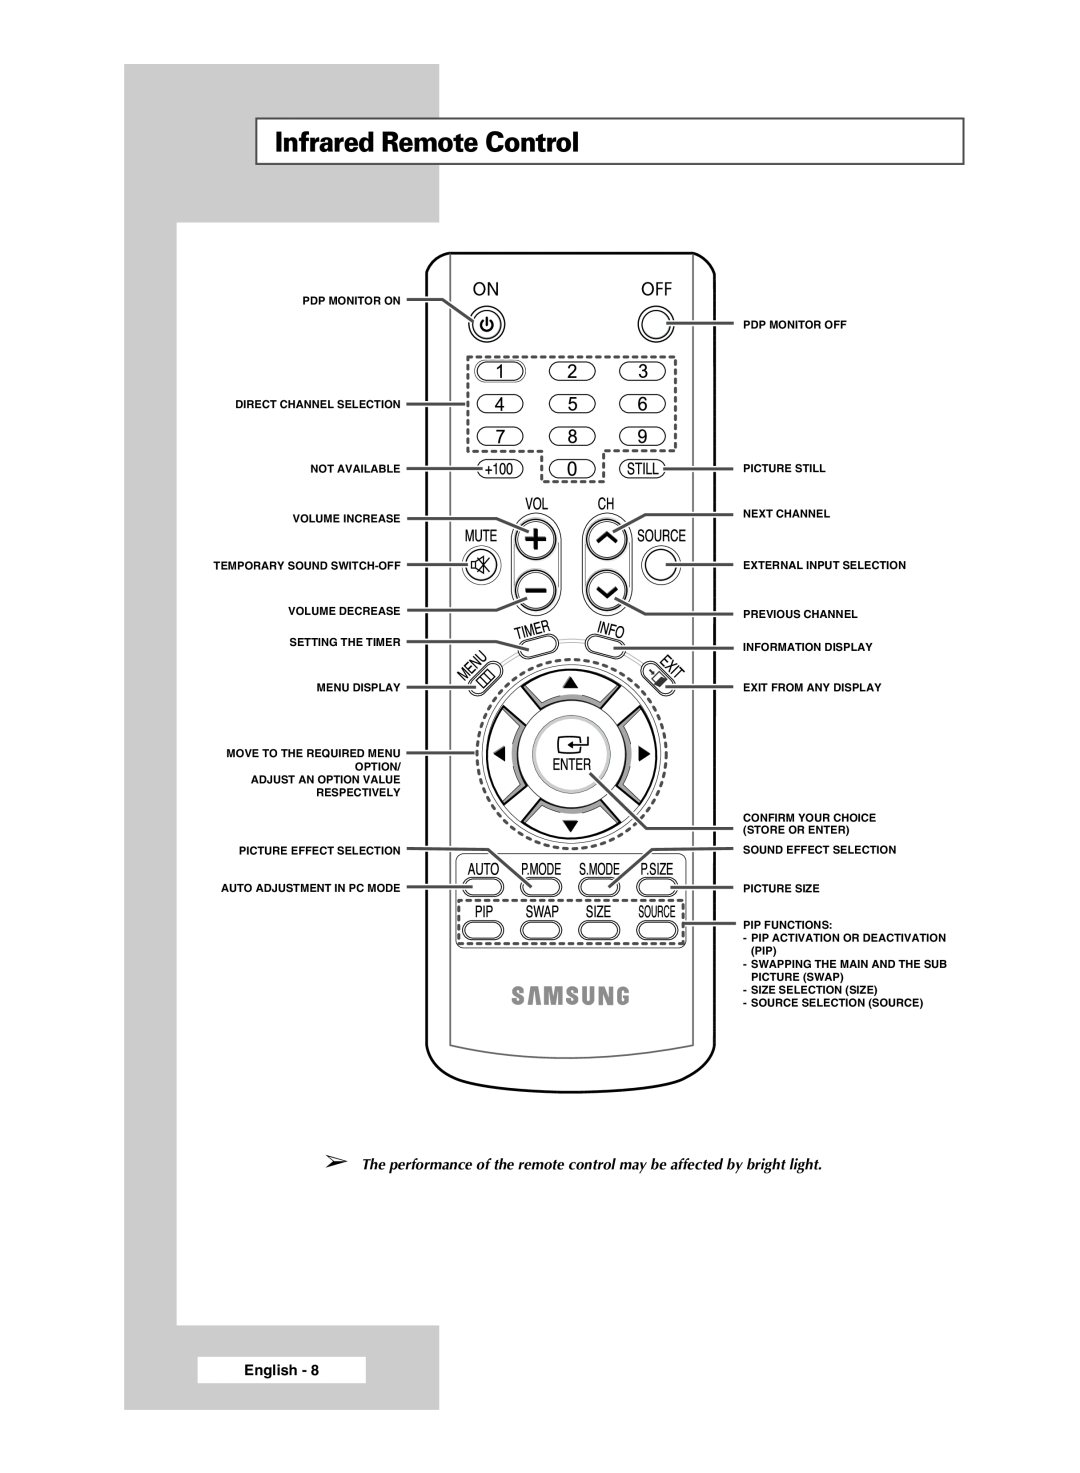 Samsung PPM42M5SSX/EDC Infrared Remote Control, The performance of the remote control may be affected by bright light 